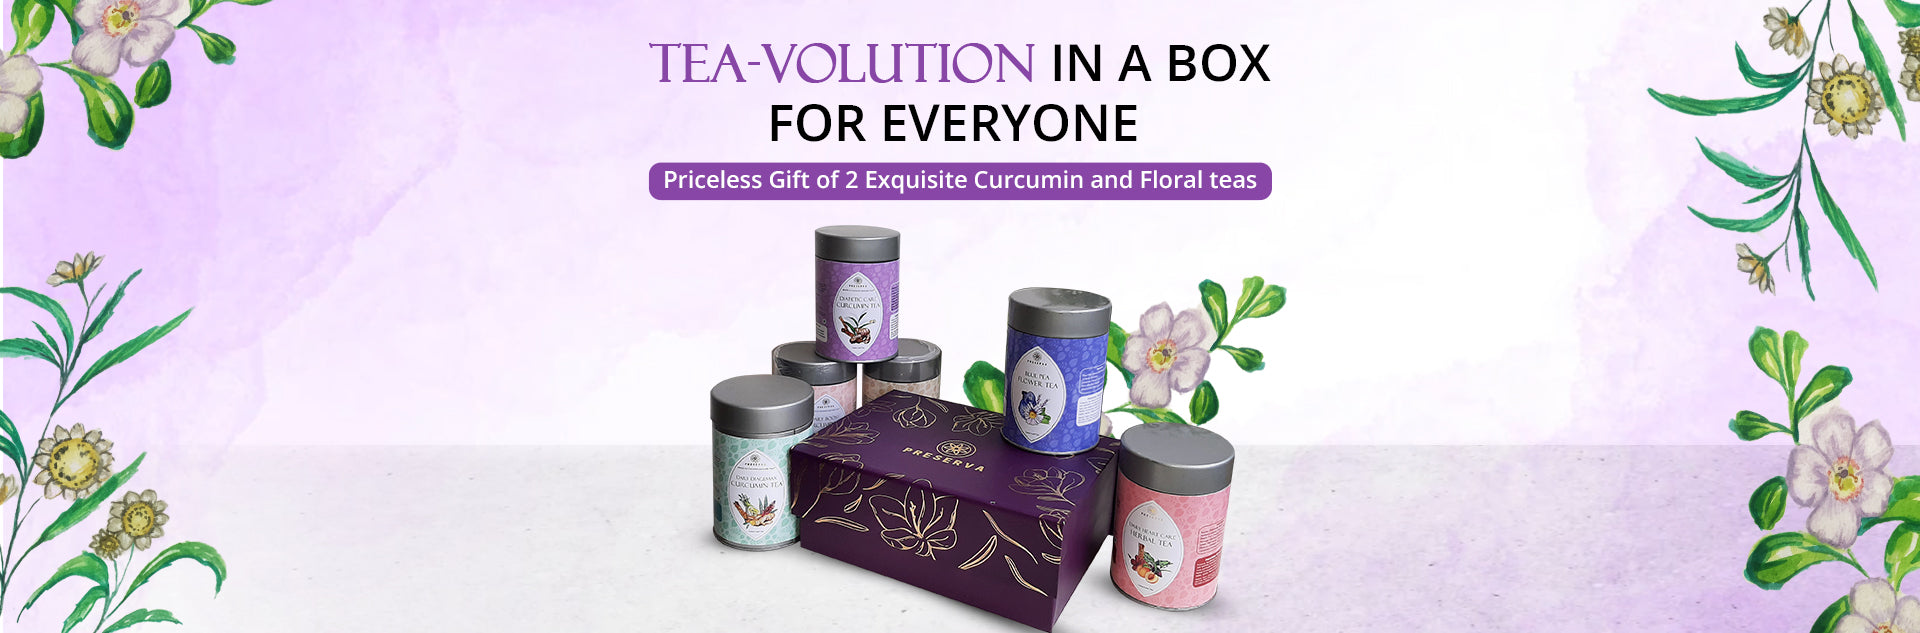 Preserva Wellness Tea Gift Box with small tea boxes on a purple floral banner